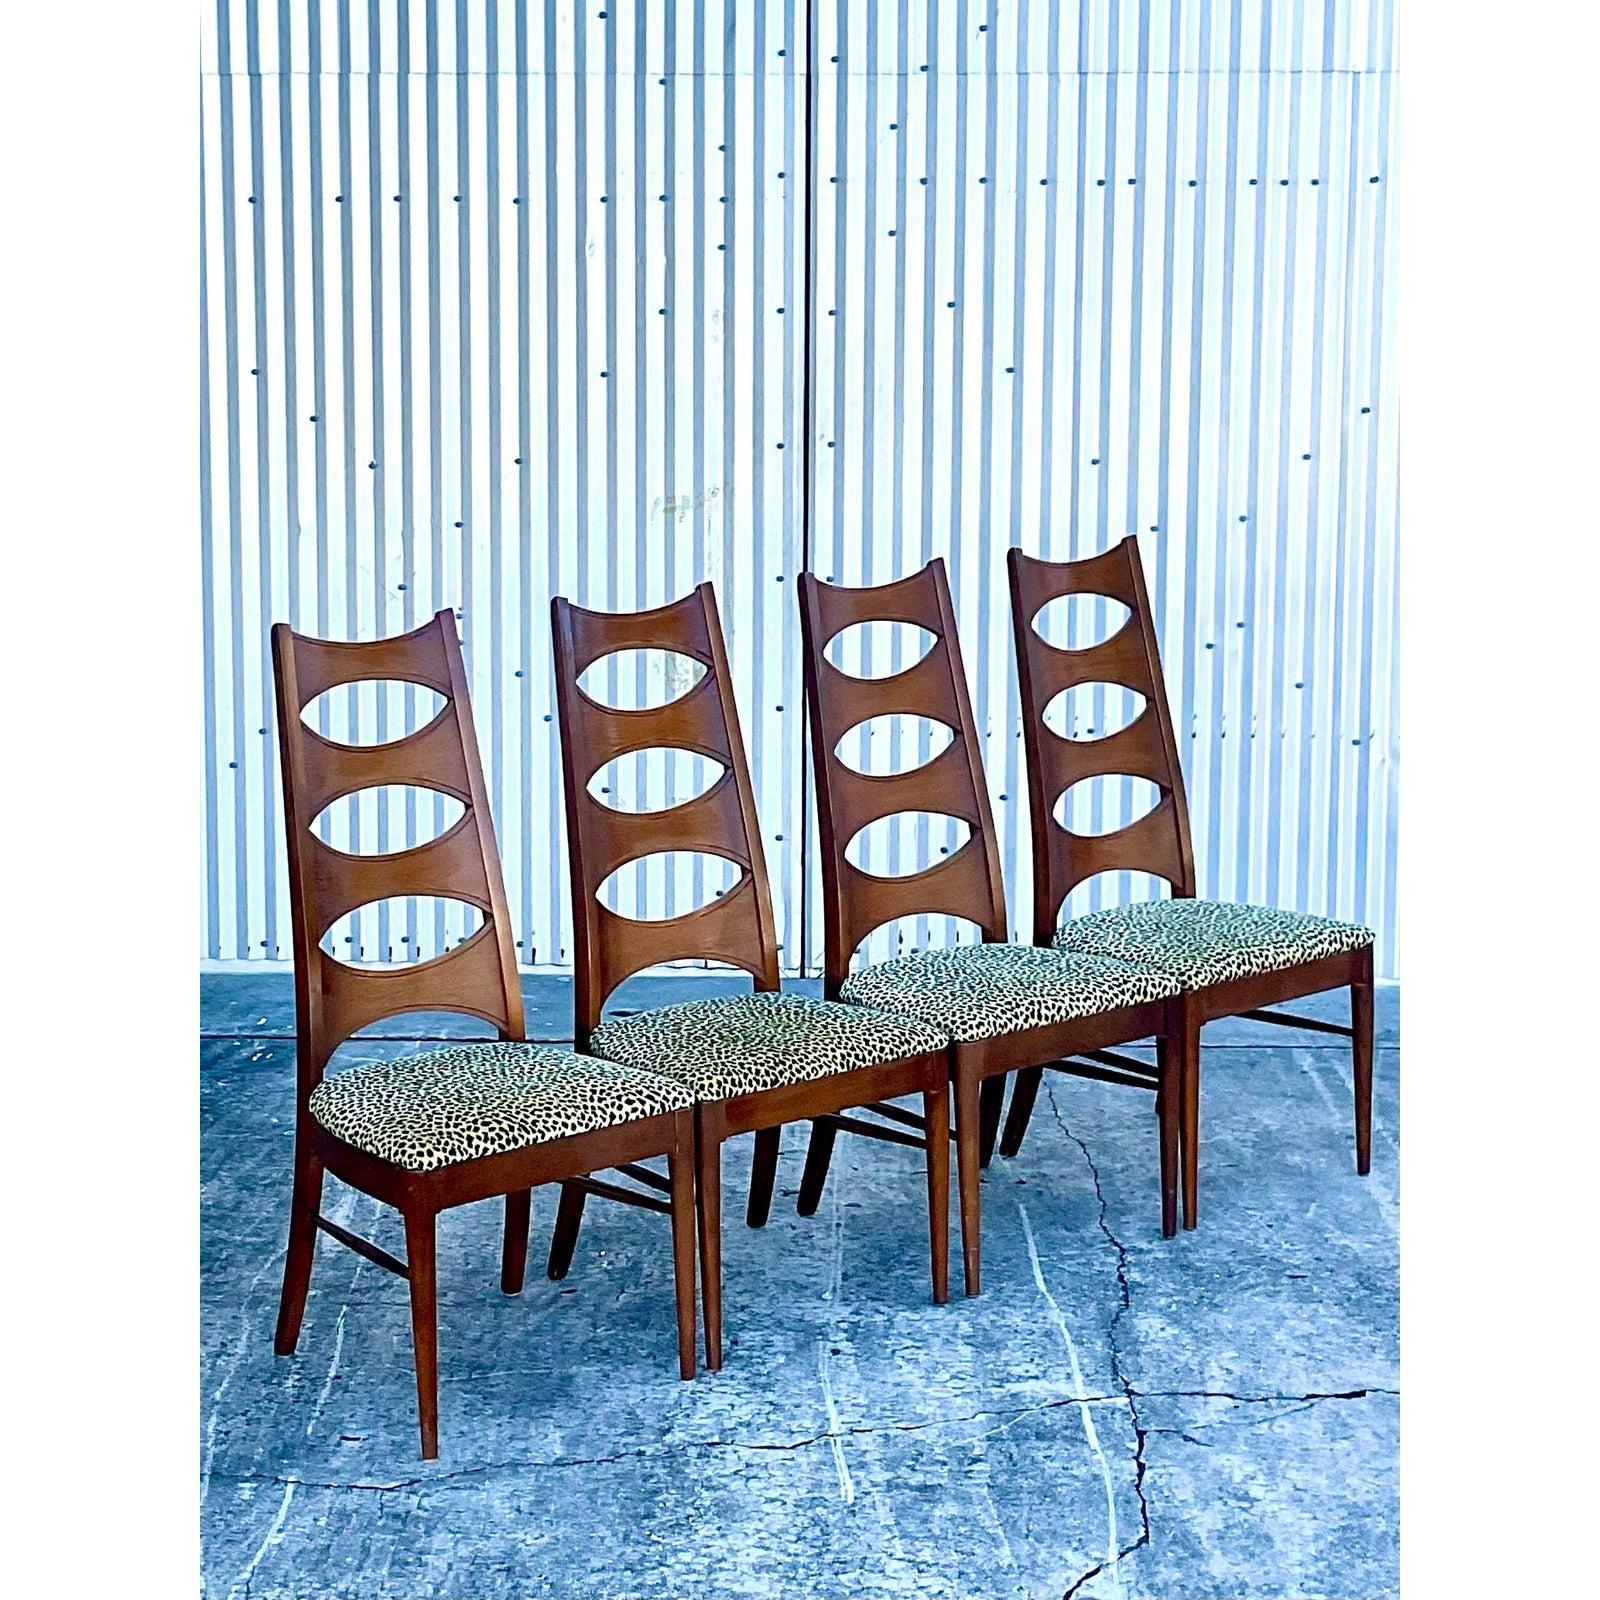 Upholstery Midcentury Kent Coffey Perspecta “Cats Eye” Dining Chairs, Set of 4